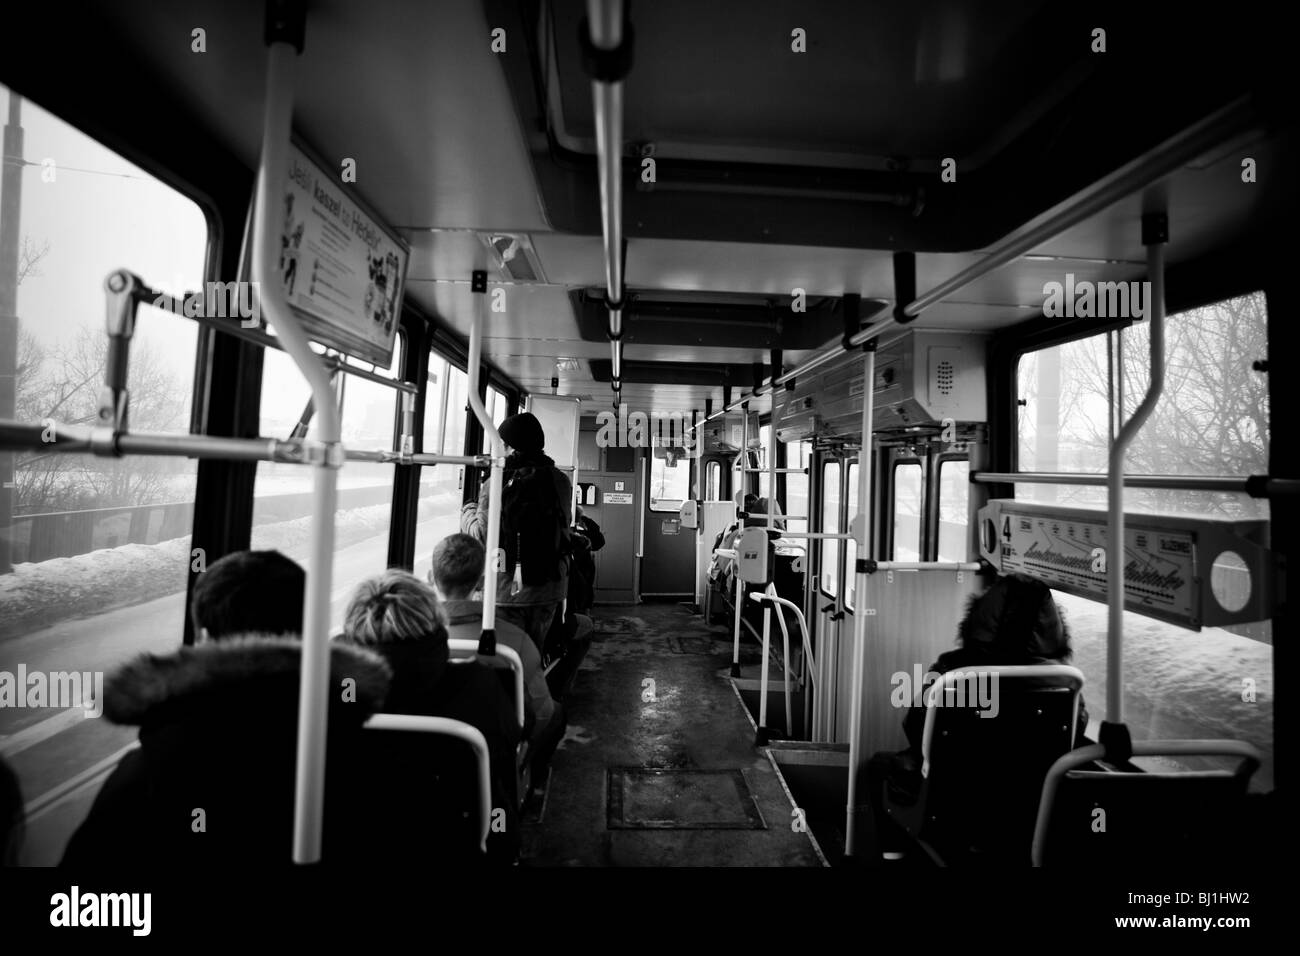 Interior of a streetcar or tramway car in the downtown area of Warsaw with passengers on seats, Poland, Eastern Europe, EU Stock Photo